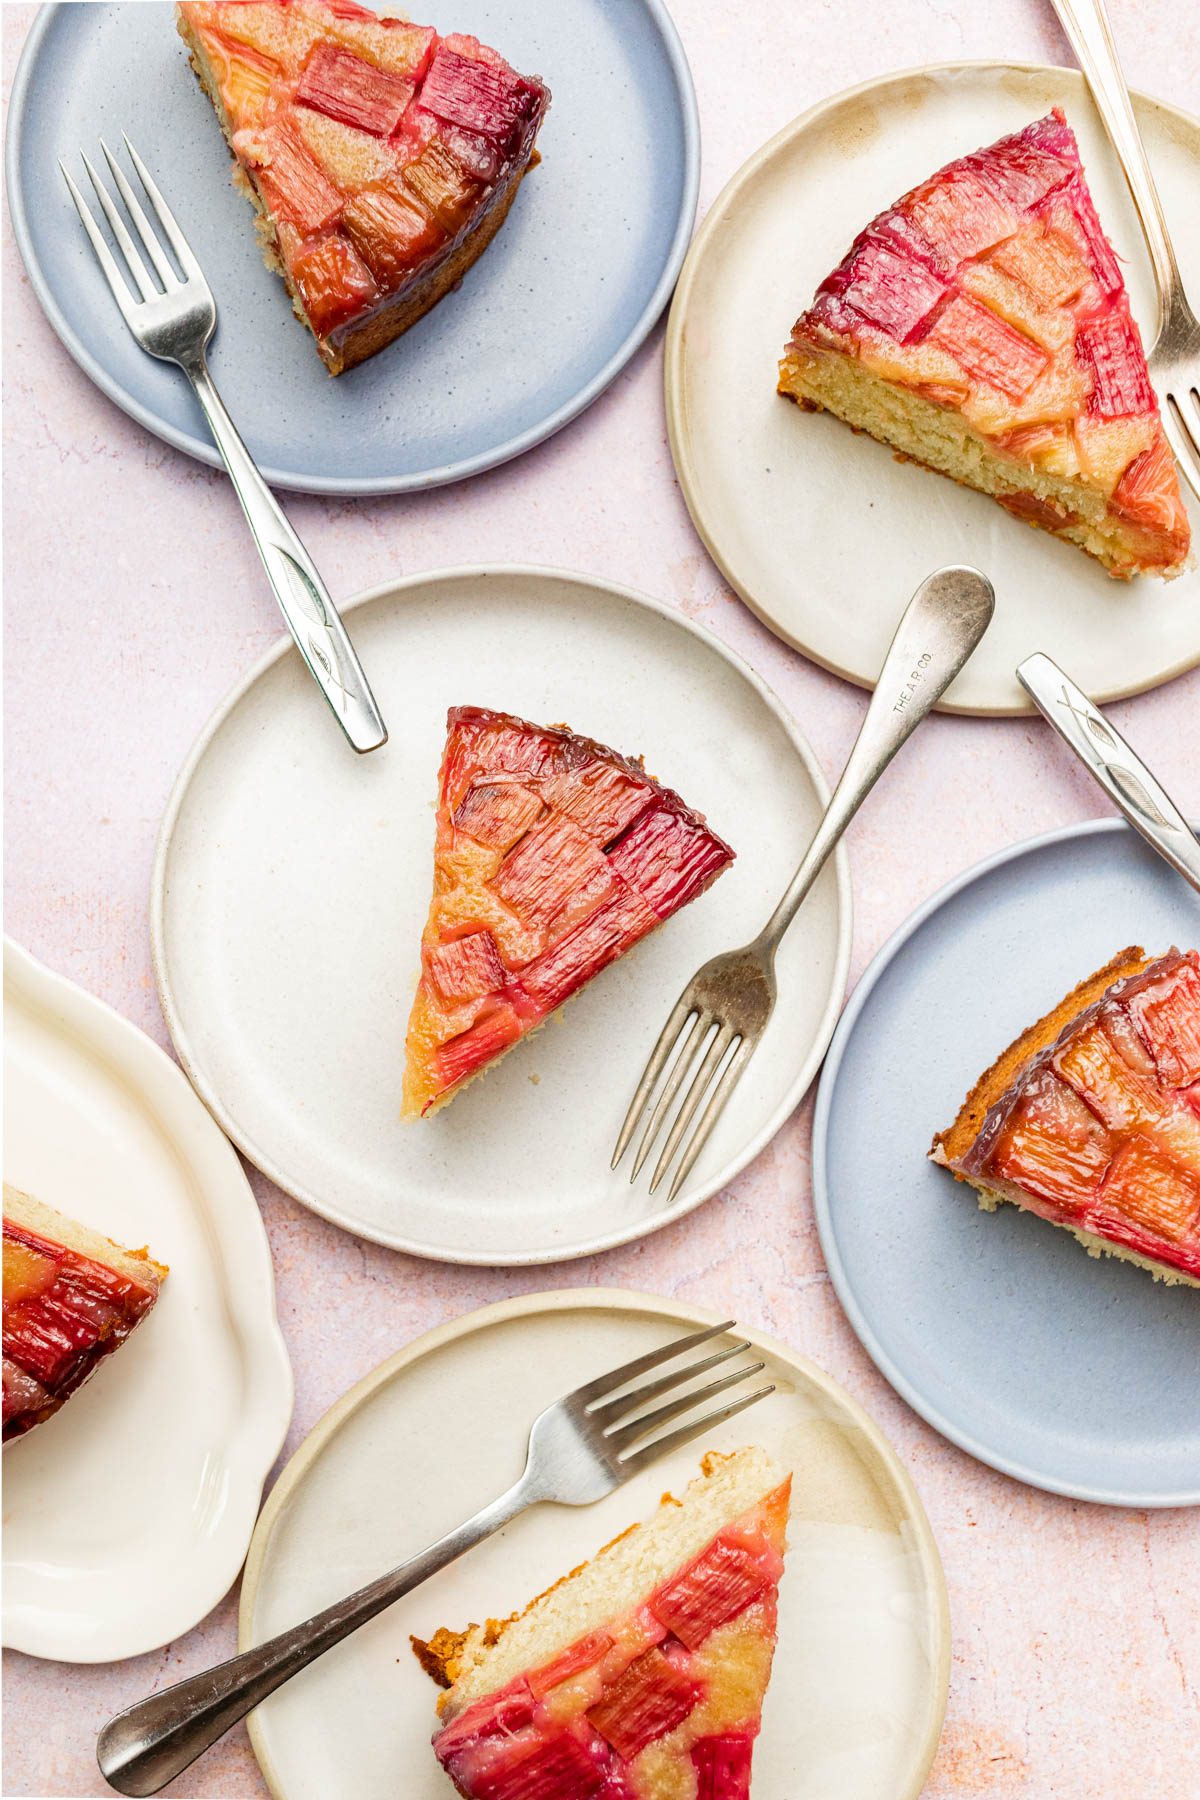 Several slices of rhubarb cake on plates.